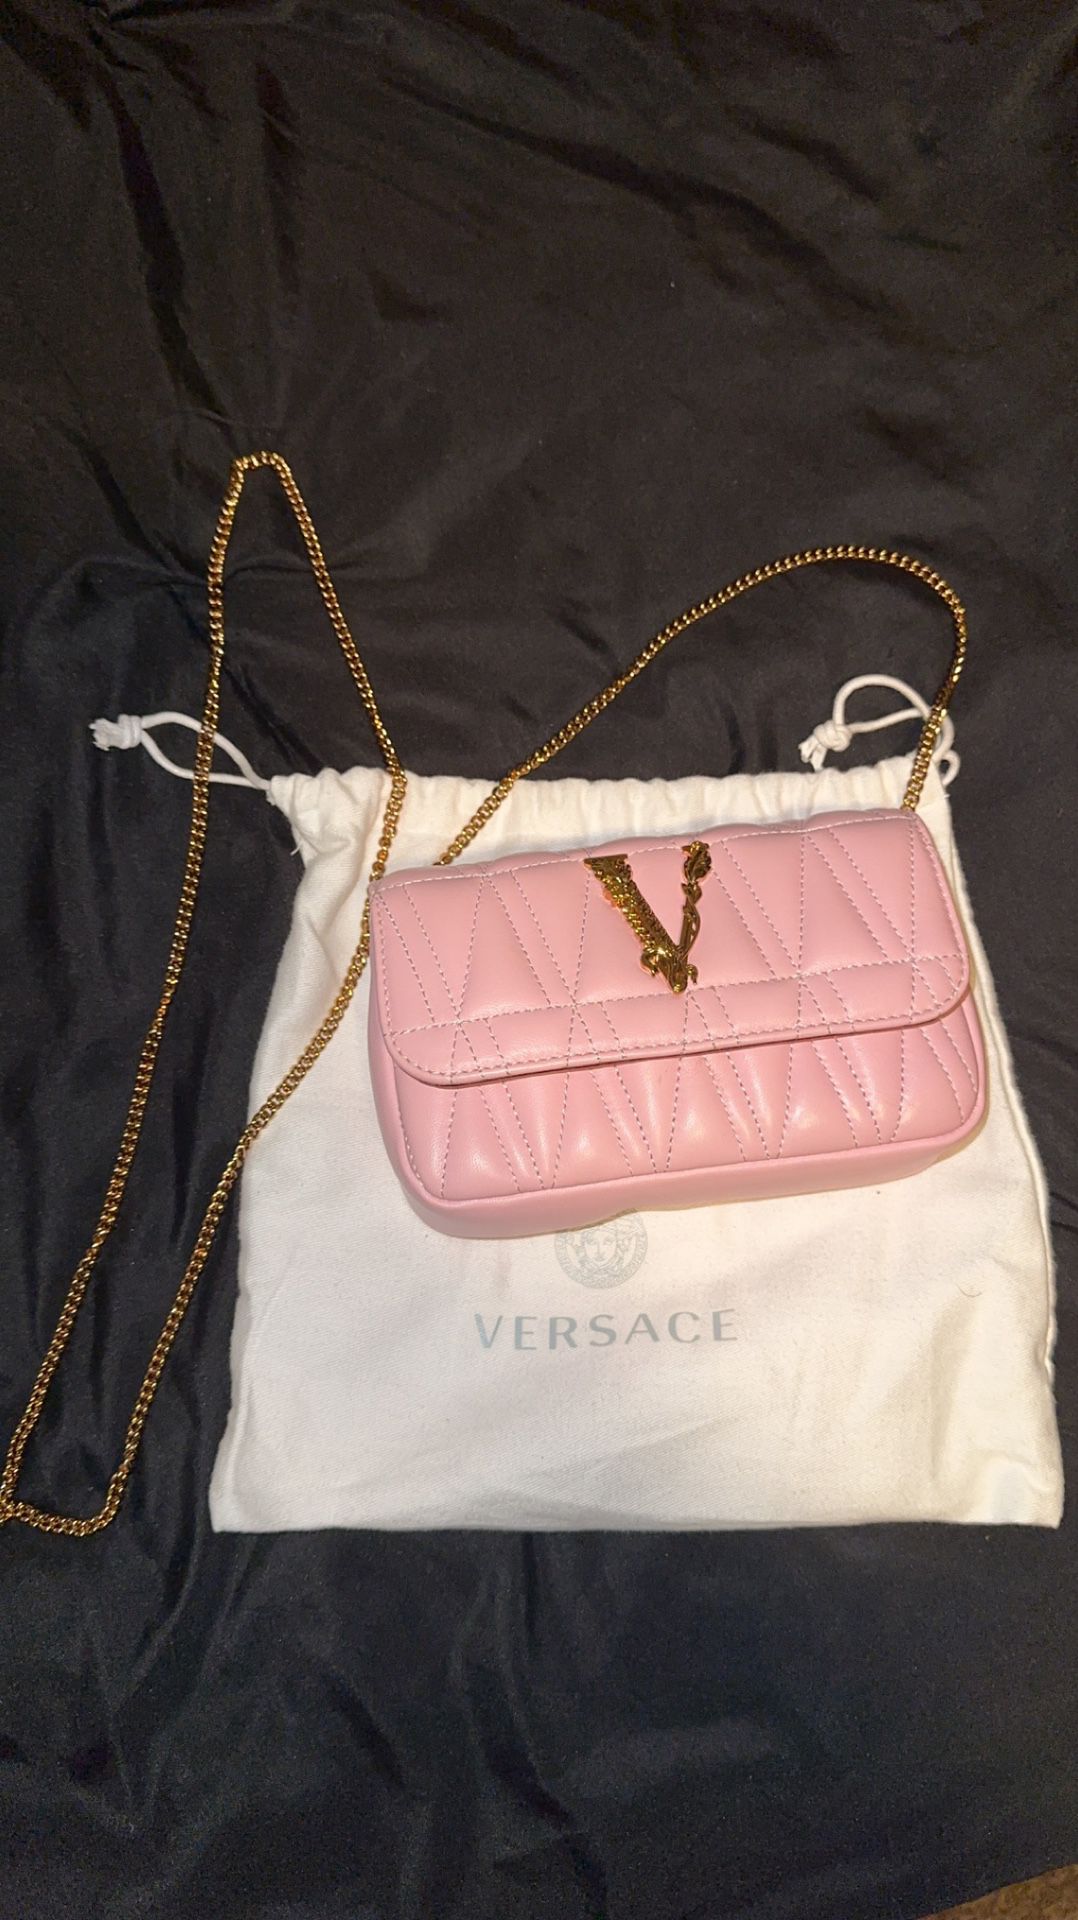 Pink Mini Versace Tote Bag for Sale in New Windsor, NY - OfferUp